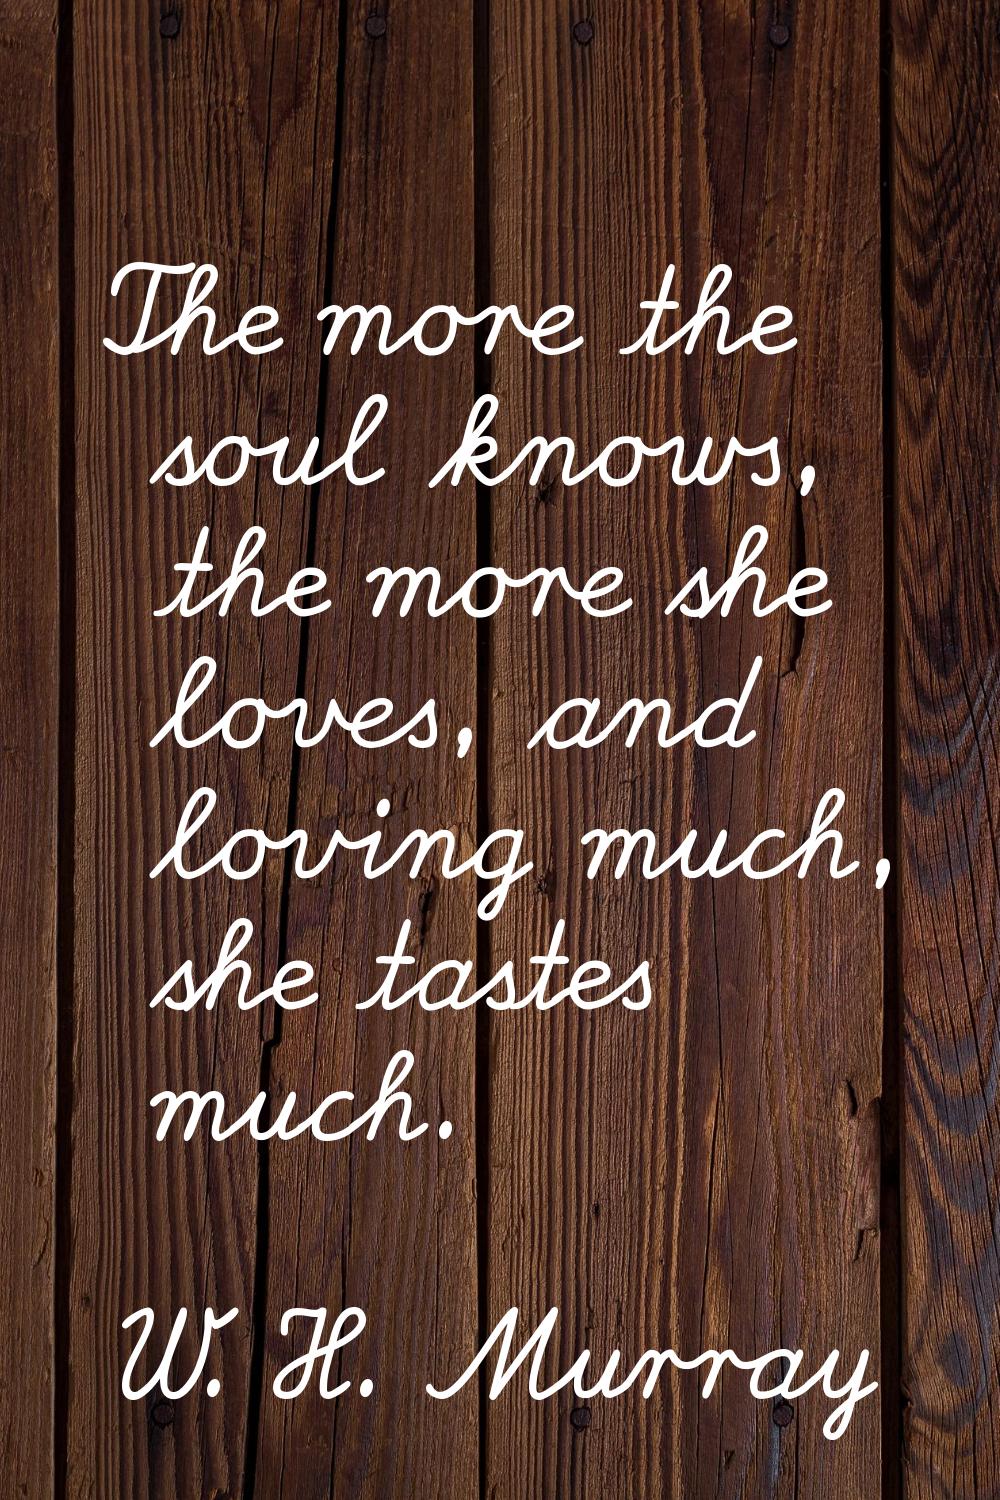 The more the soul knows, the more she loves, and loving much, she tastes much.